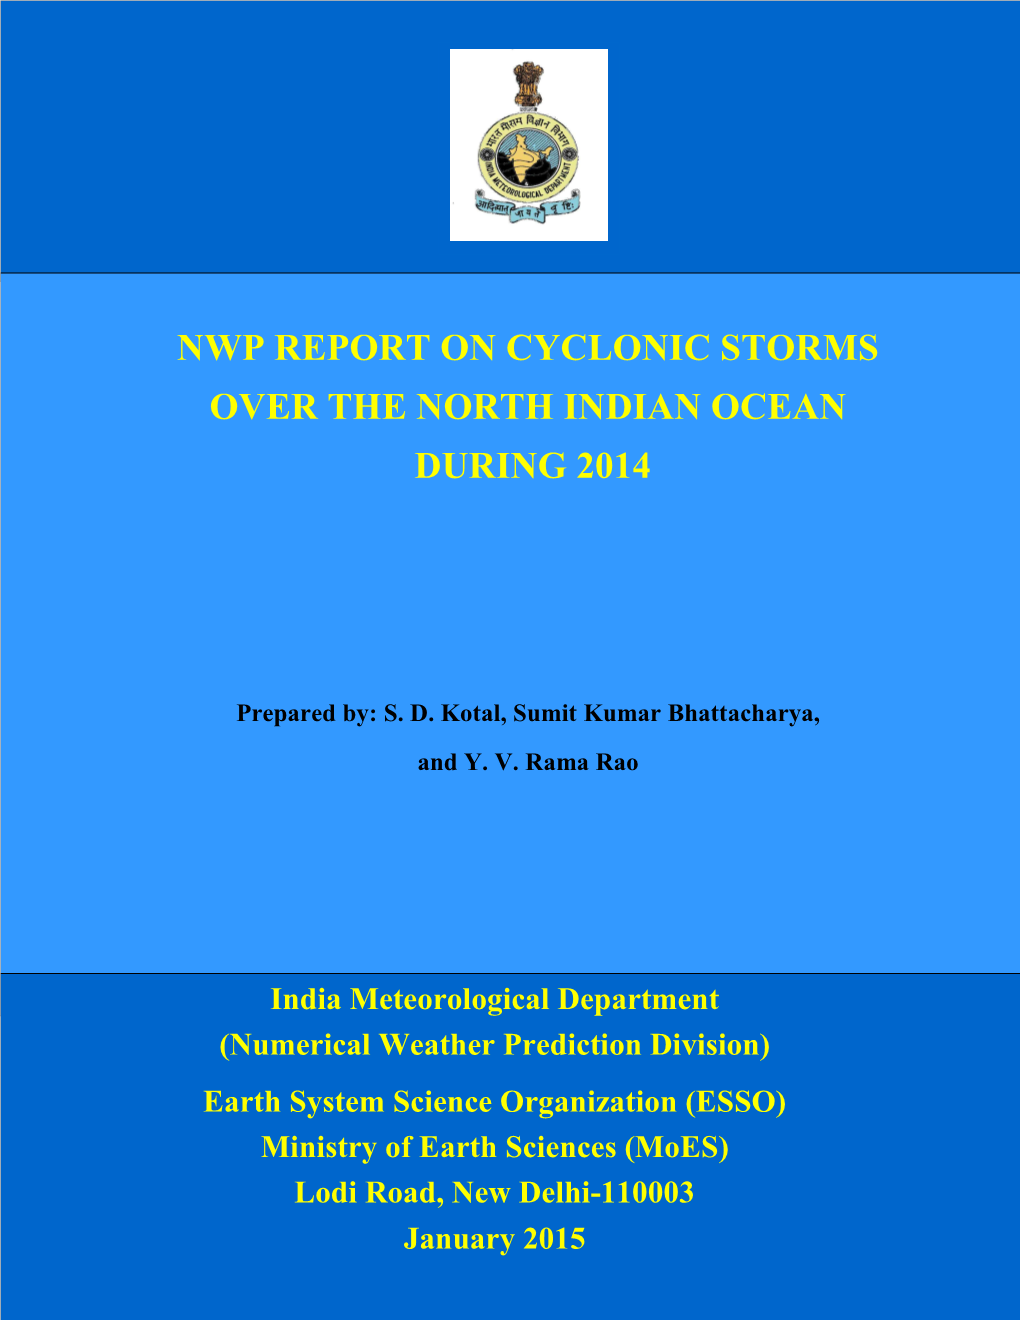 Nwp Report on Cyclonic Storms Over the North Indian Ocean During 2014